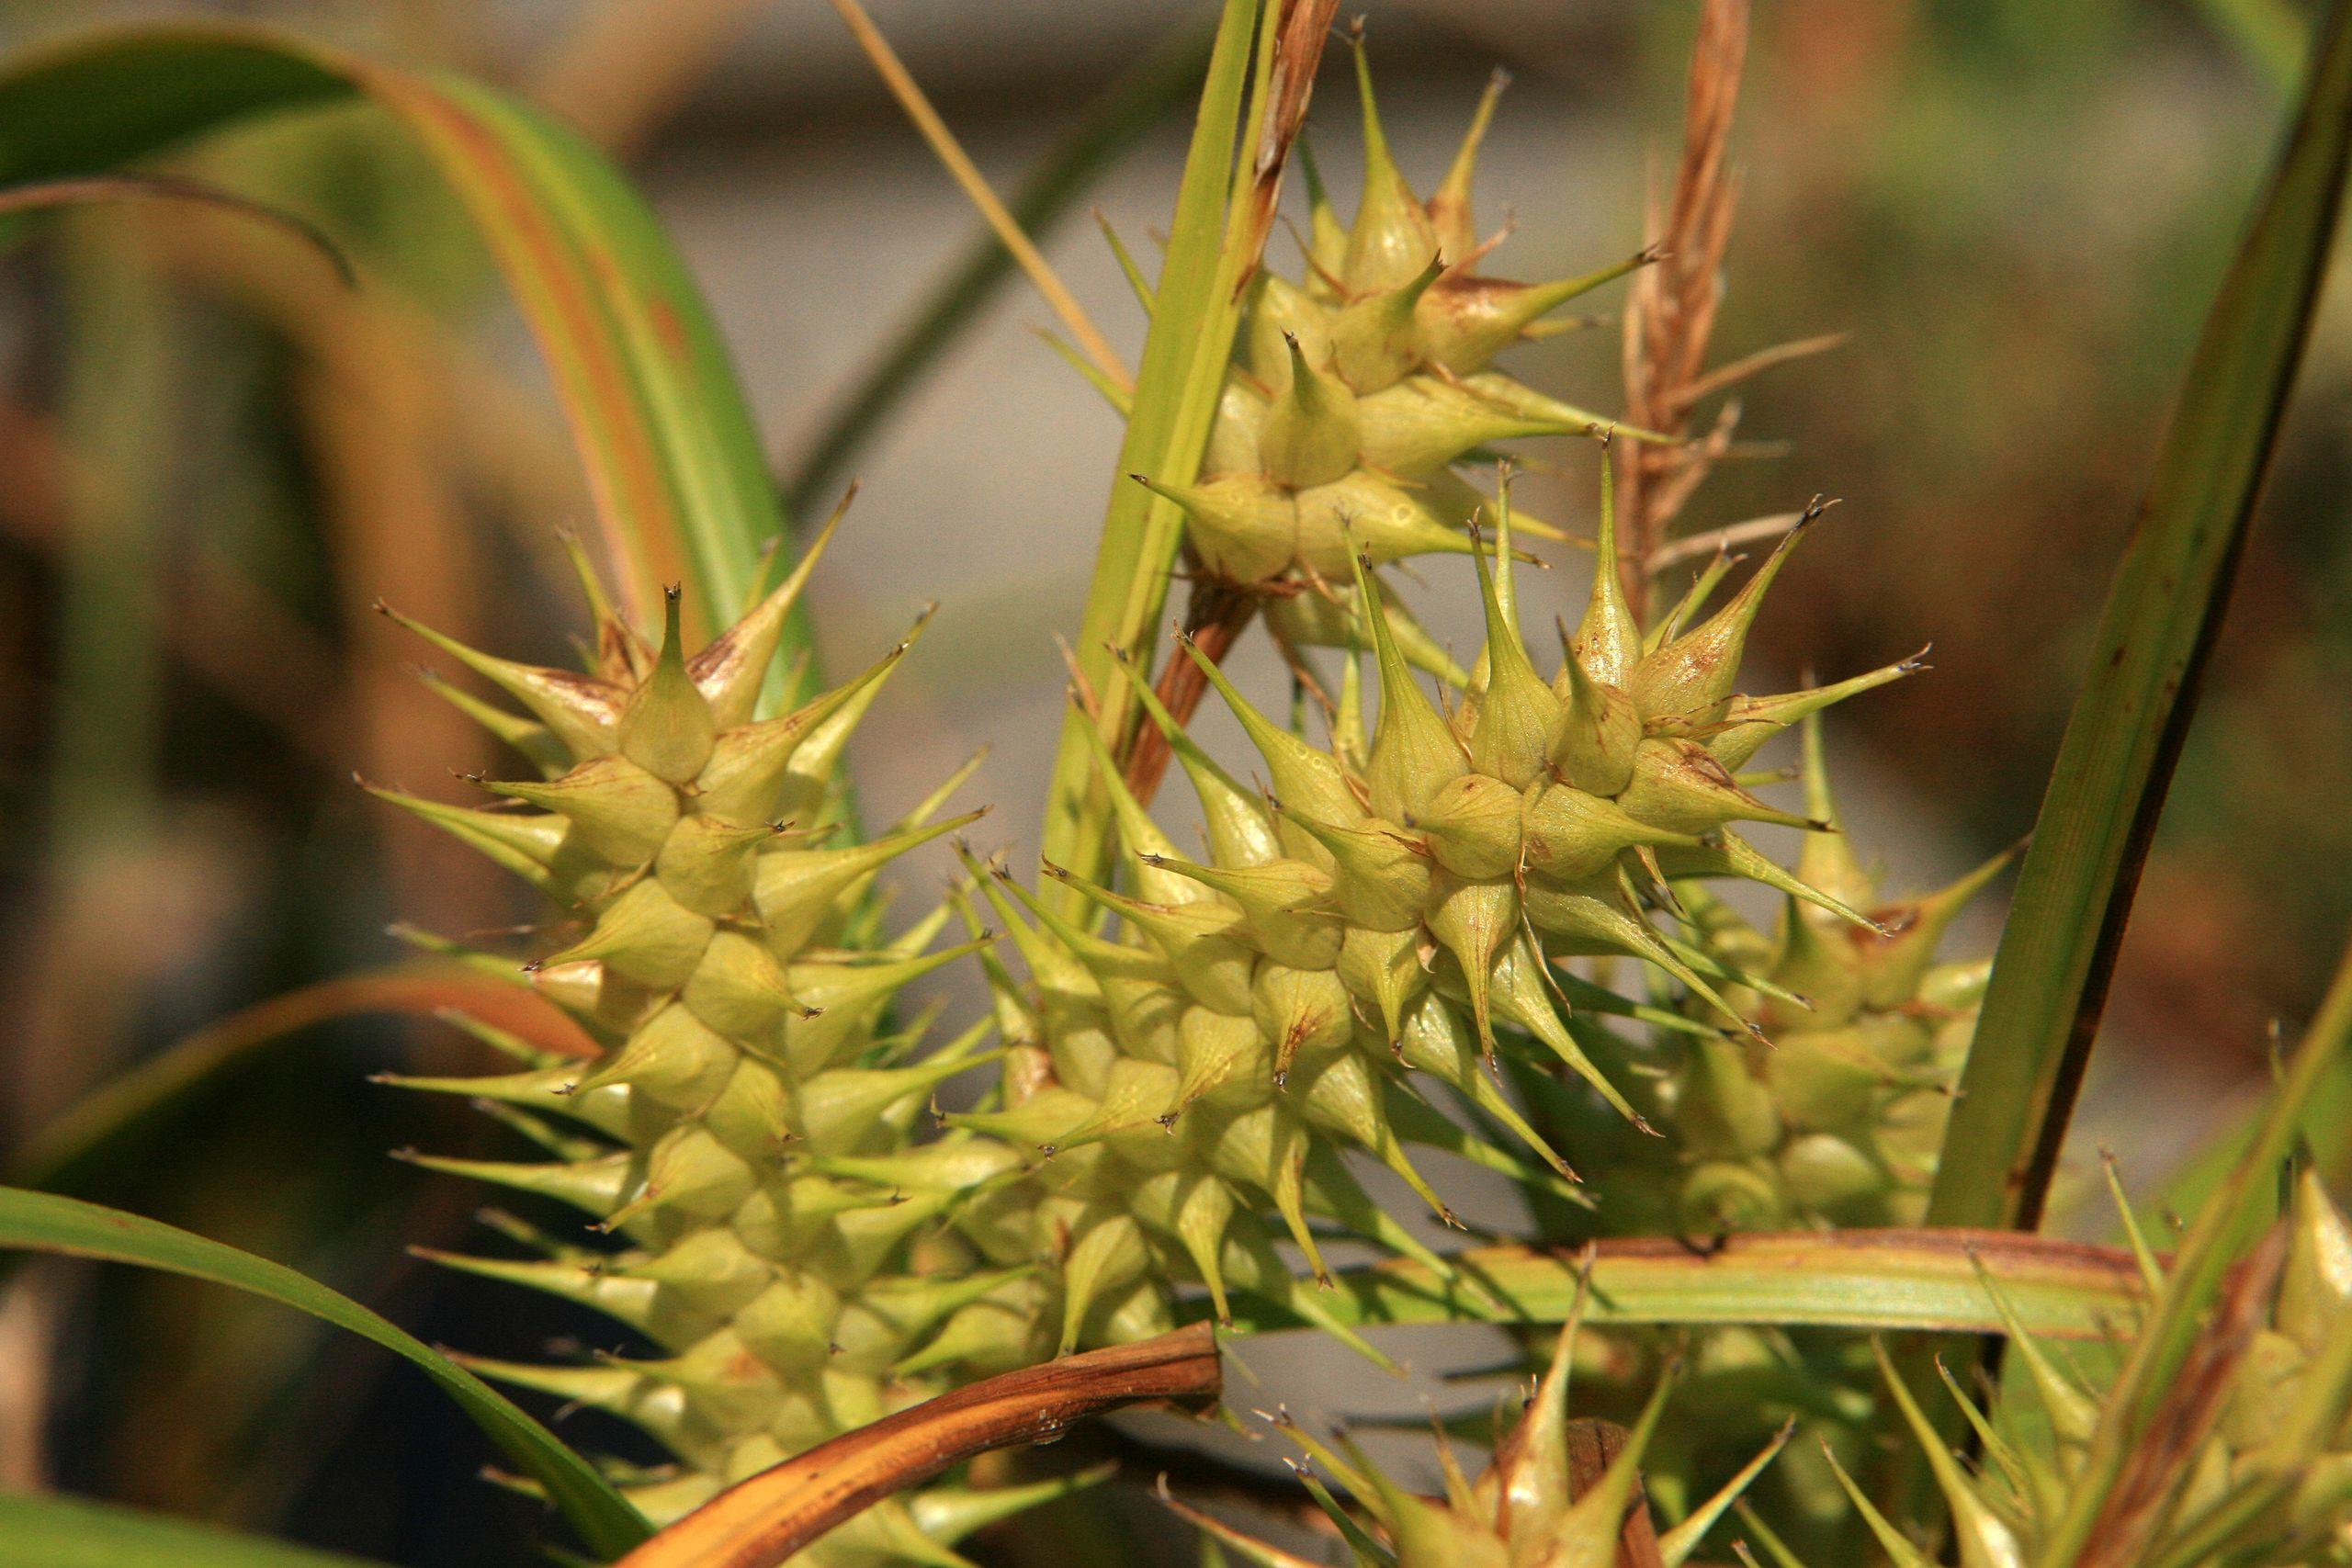 yellow-lime spikelets with lime-brown foliage and stems